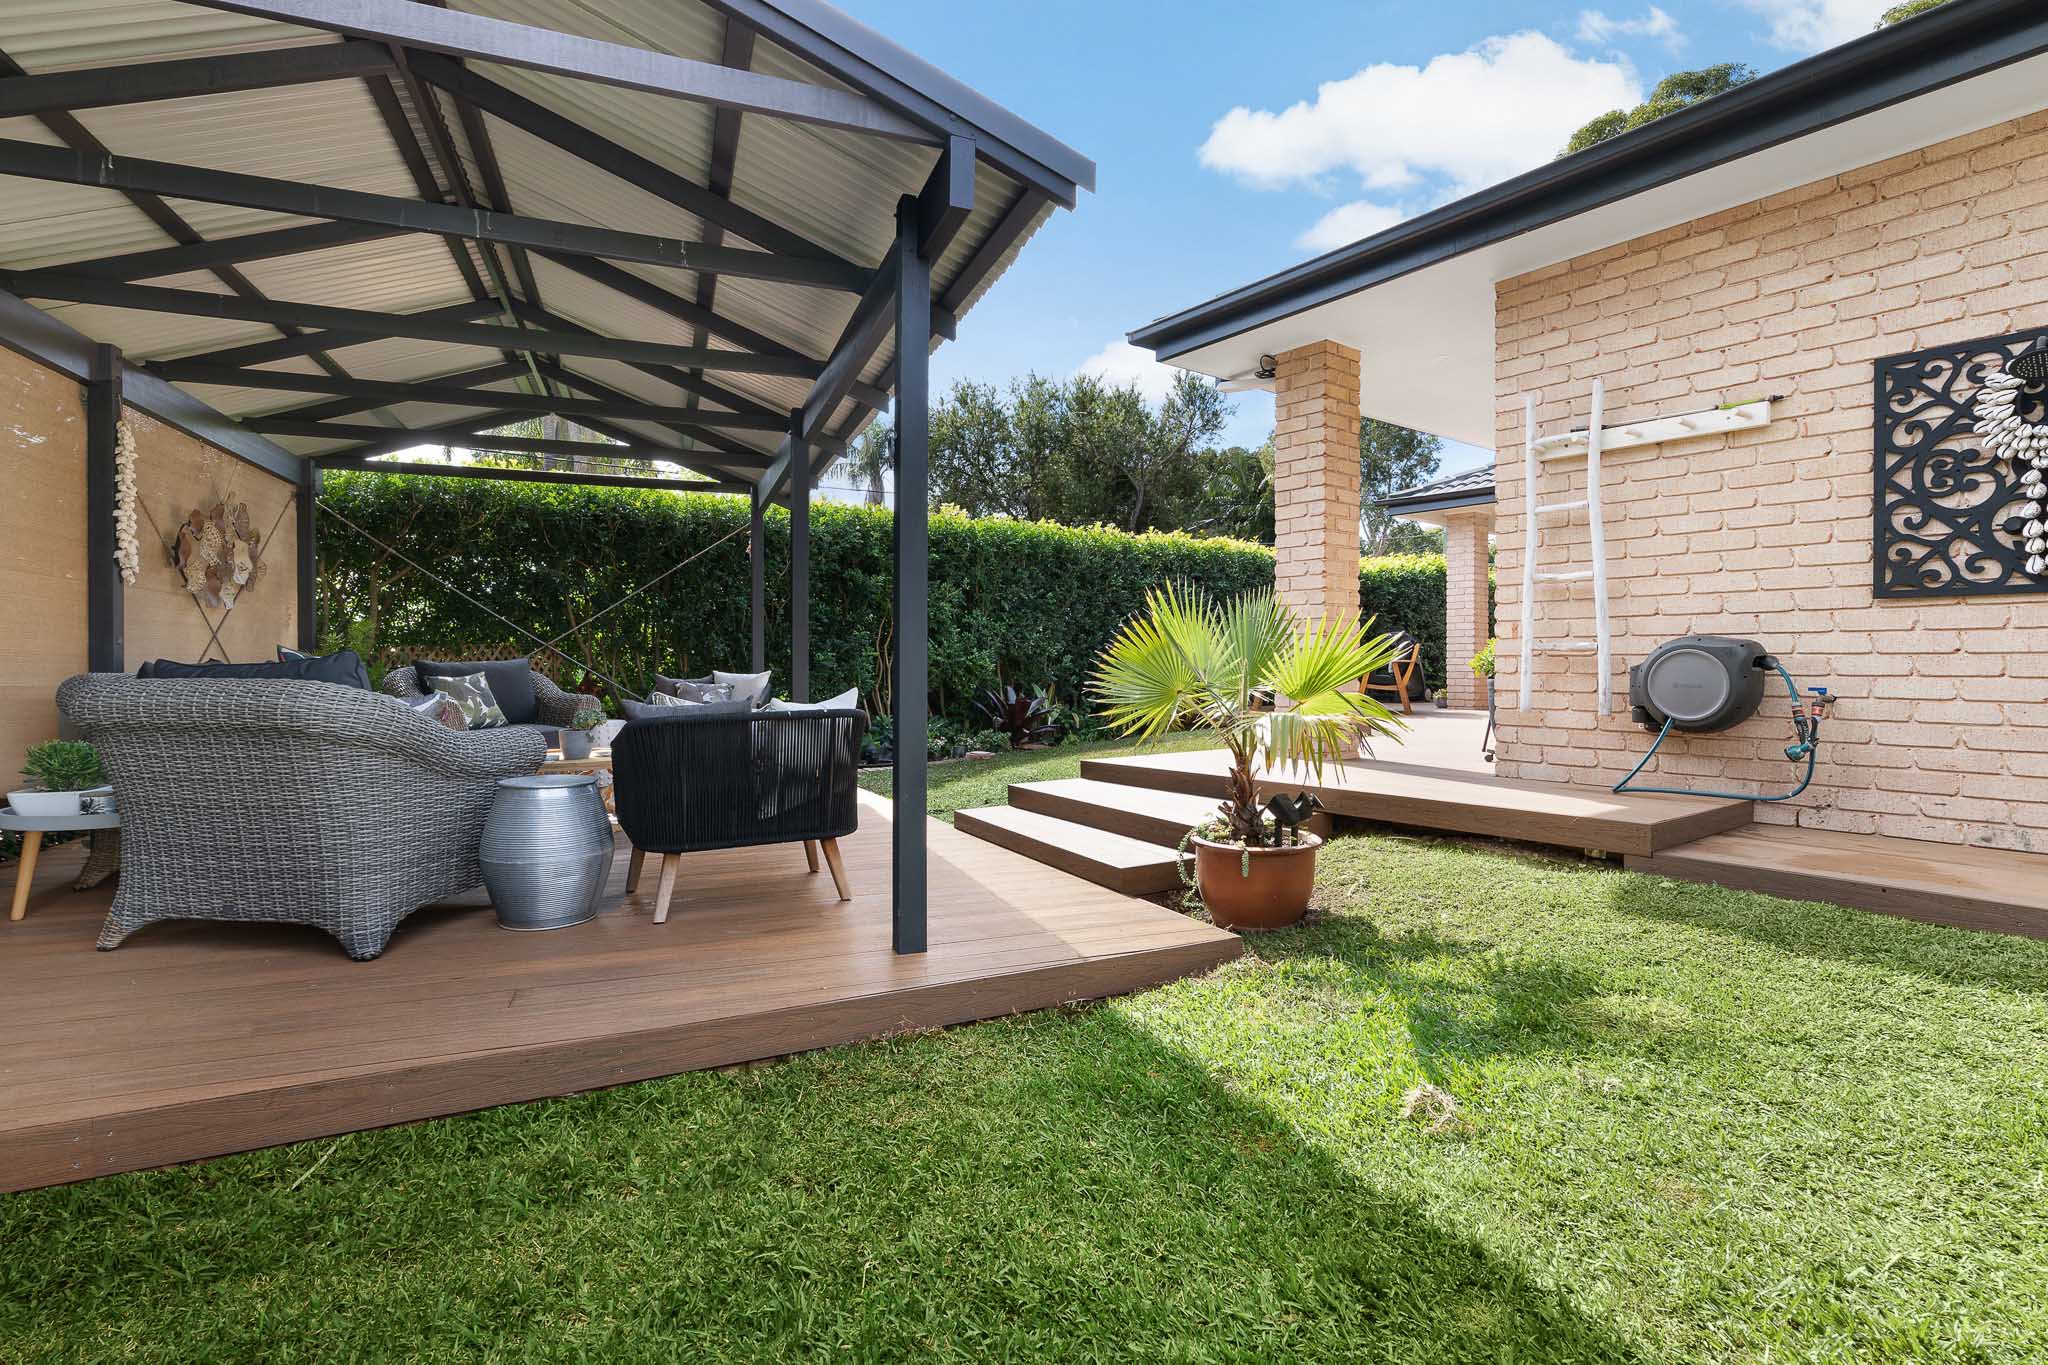 Teak composite decking boards with patio furniture and a pergola above